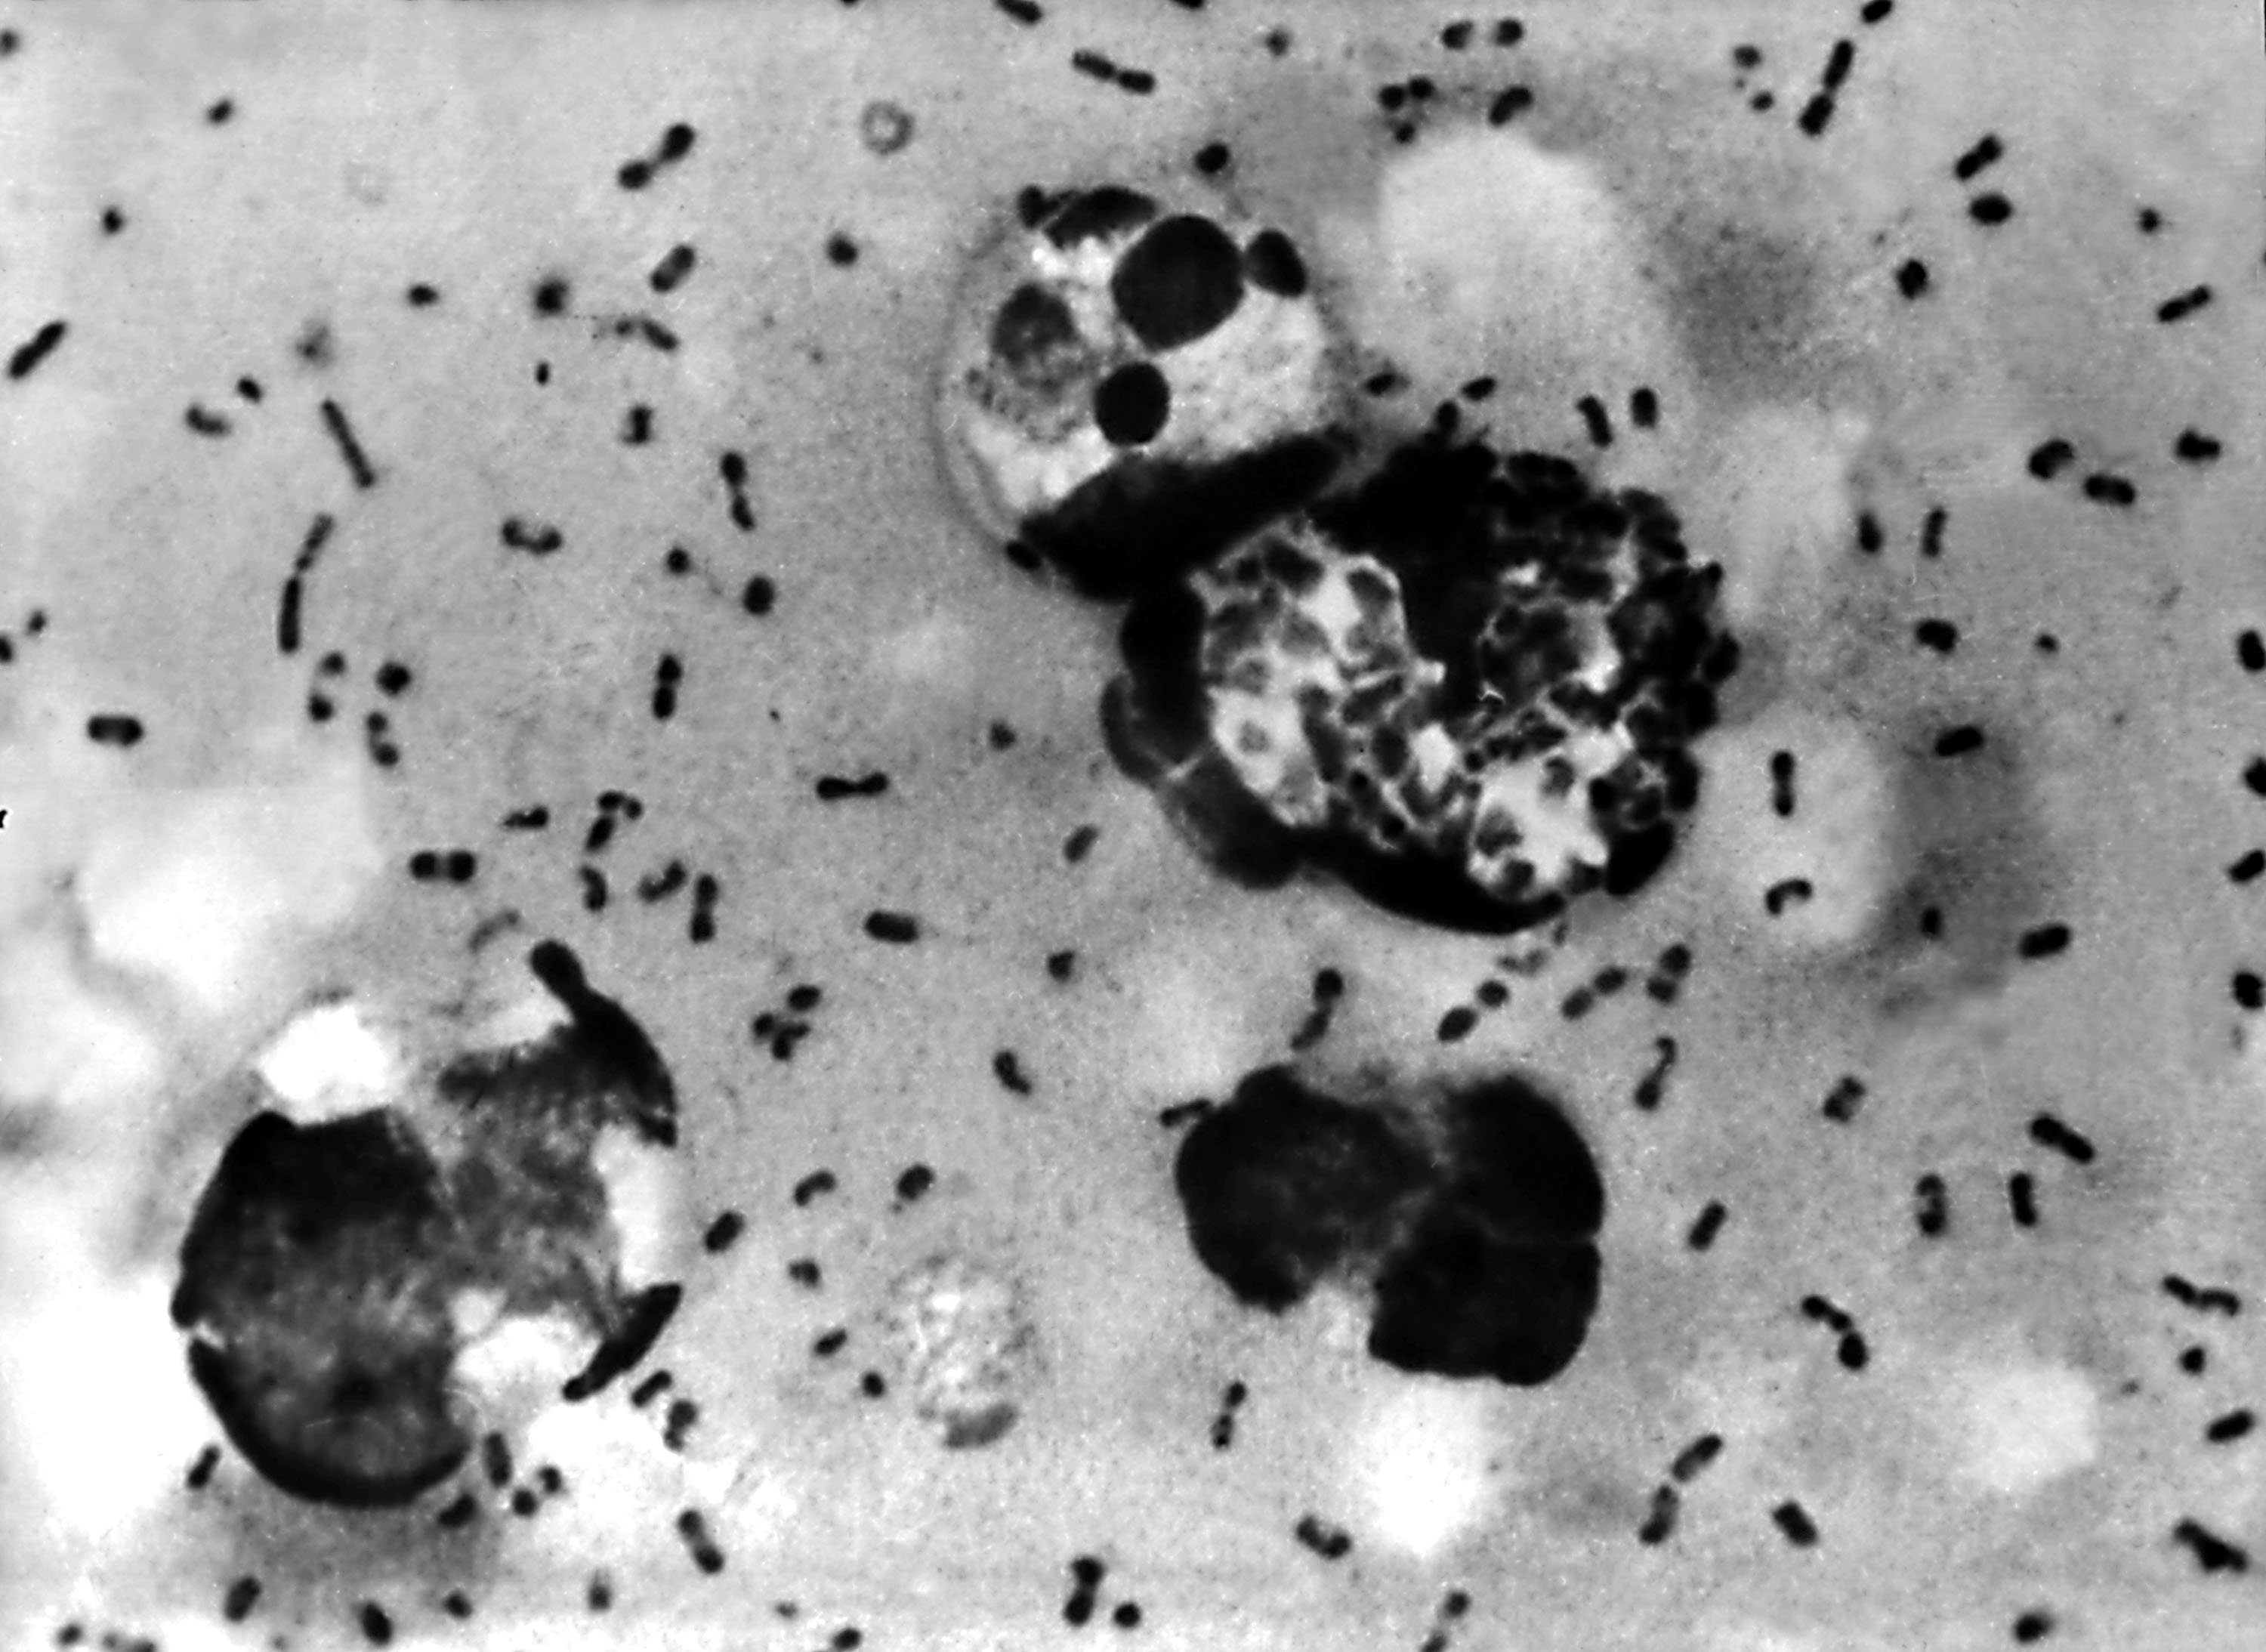 UNDATED PHOTO: A bubonic plague smear, prepared from a lymph removed from an adenopathic lymph node, or bubo, of a plague patient, demonstrates the presence of the Yersinia pestis bacteria that causes the plague in this undated photo. The FBI has confirmed that about 30 vials that may contain bacteria that could cause bubonic or pneumonic plague have gone missing, then found, from the Health Sciences Center at Texas Tech University January 15, 2003 in Lubbock, Texas. The plague, considered a likely bioterror agent since it's easy to make, is easily treatable with antibiotics if diagnosed early and properly. (Photo by Centers for Disease Control and Prevention/Getty Images)